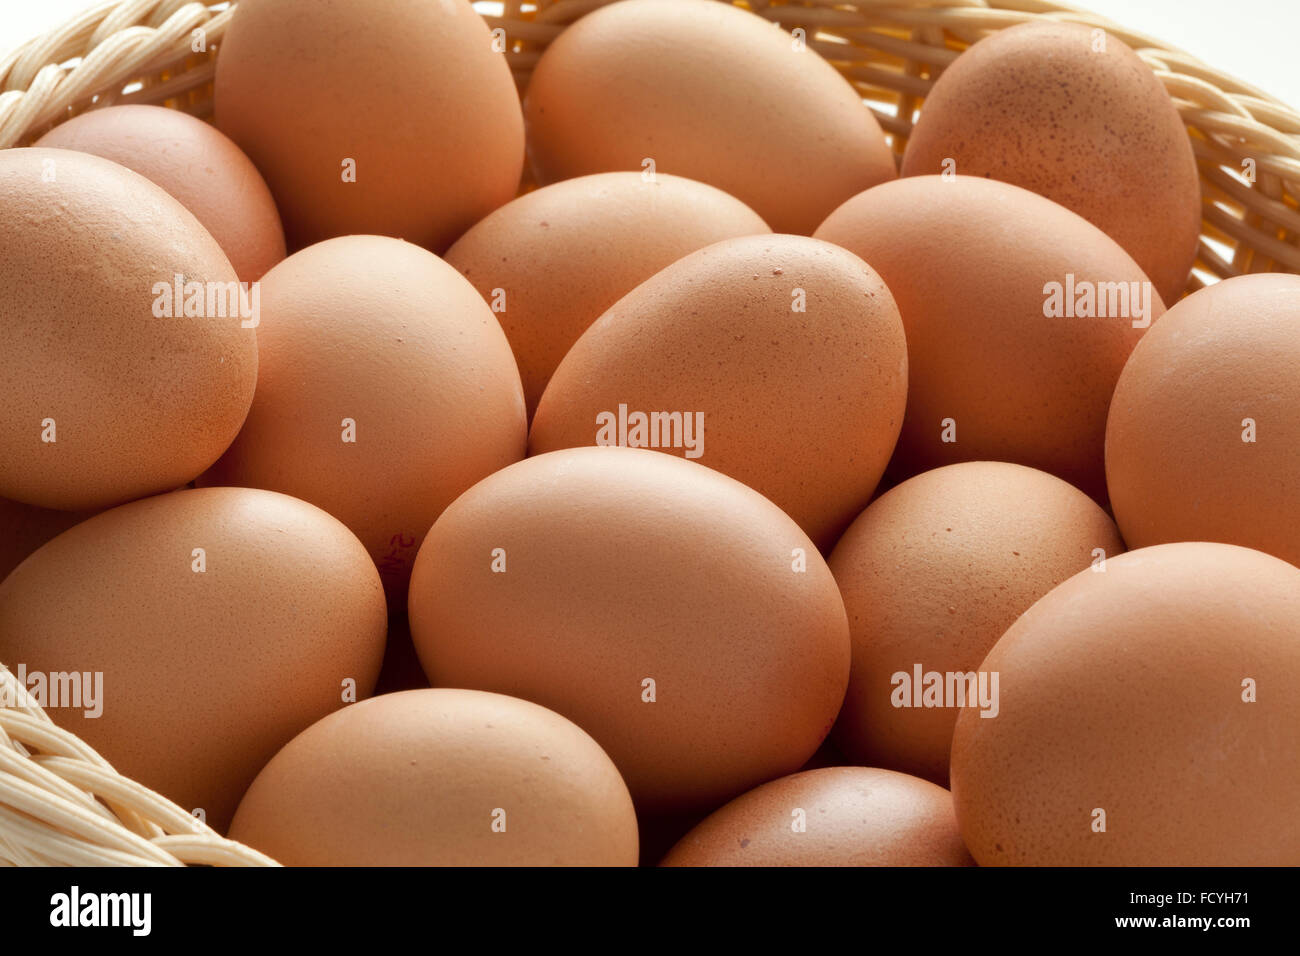 Basket with fresh brown eggs close up Stock Photo